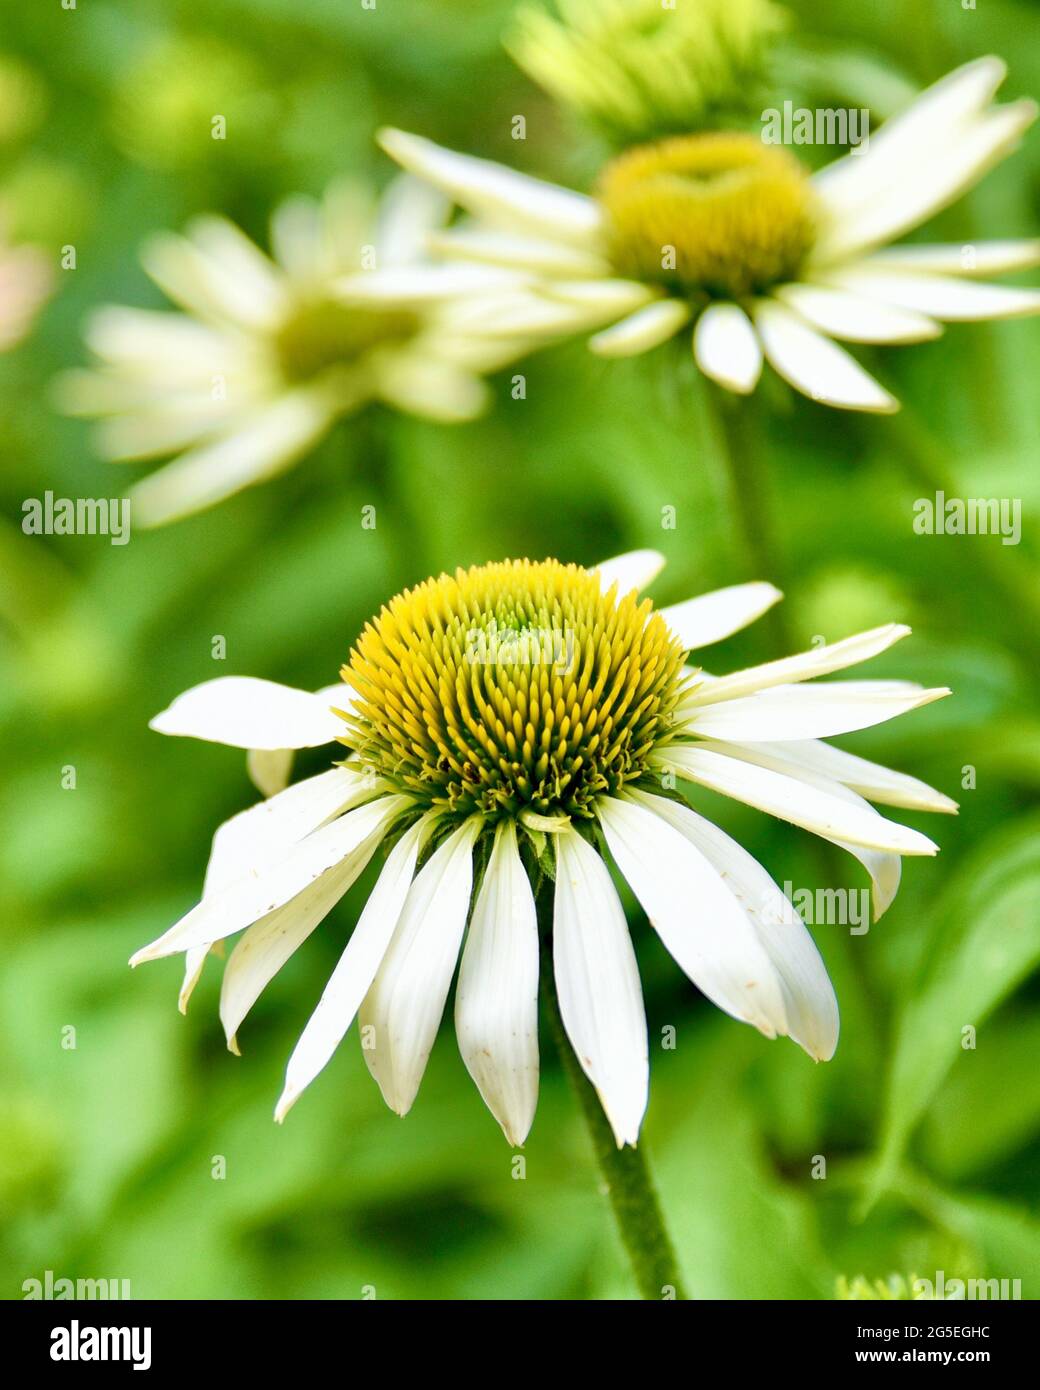 Vertical format of a beautiful white coneflower (Echinacea purpurea) on a soft, blurred green background with other coneflowers in the backdrop. Stock Photo